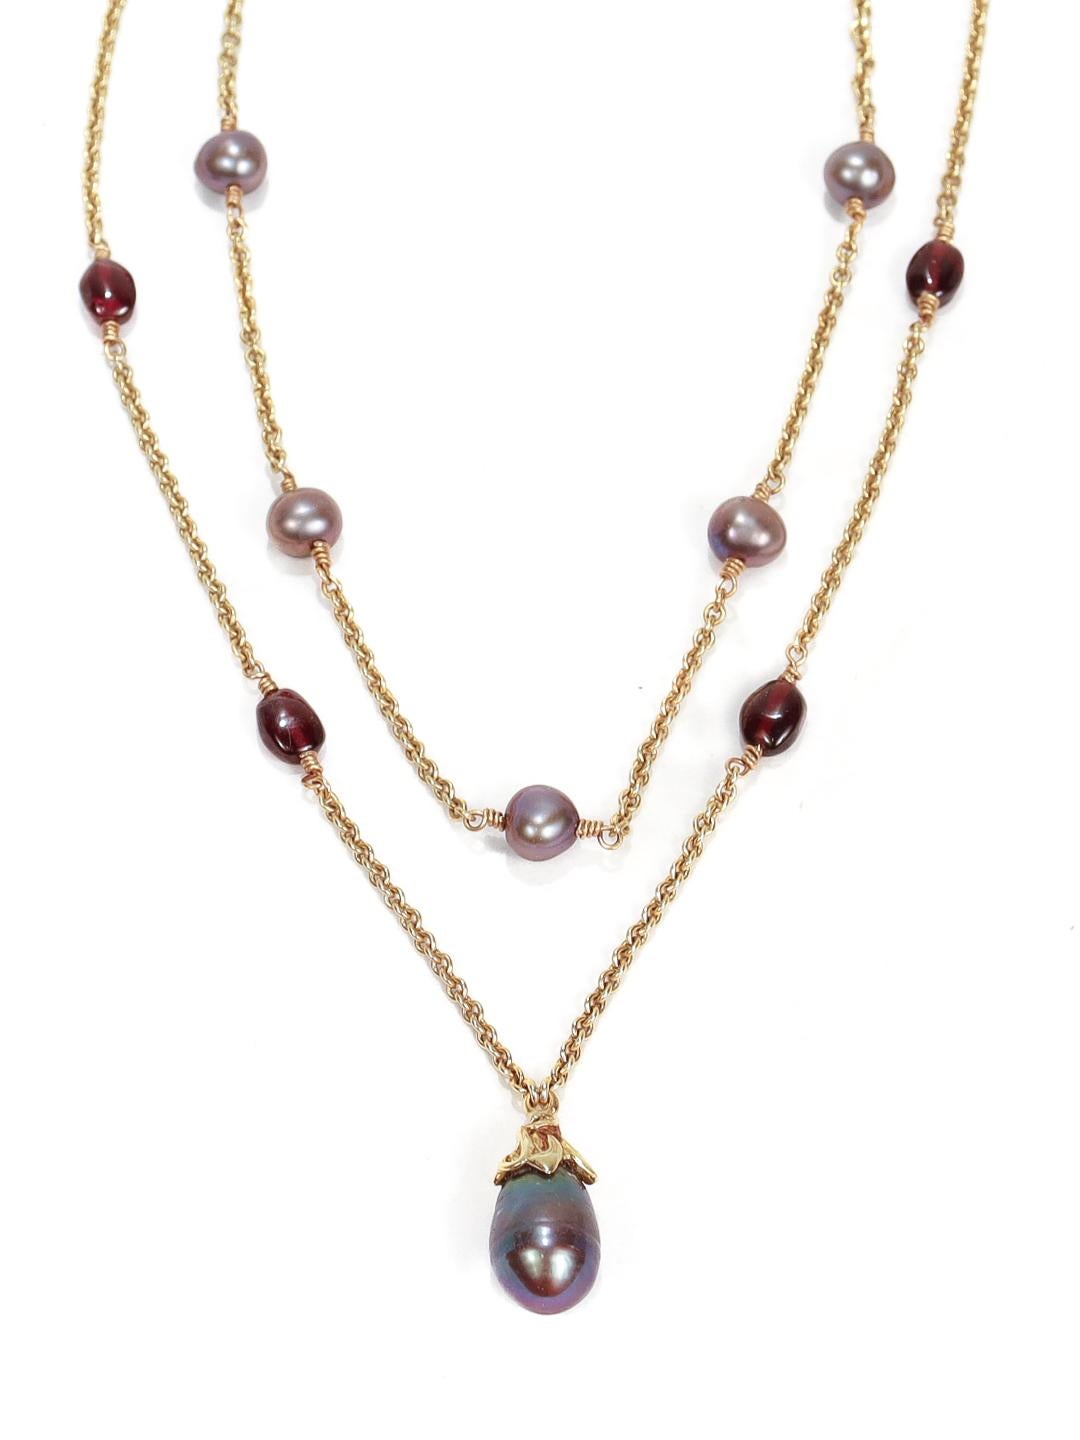 Lazaro Diaz Layered Double Chain 18k Gold, Amethyst, & Tahitian Pearl Necklace For Sale 5